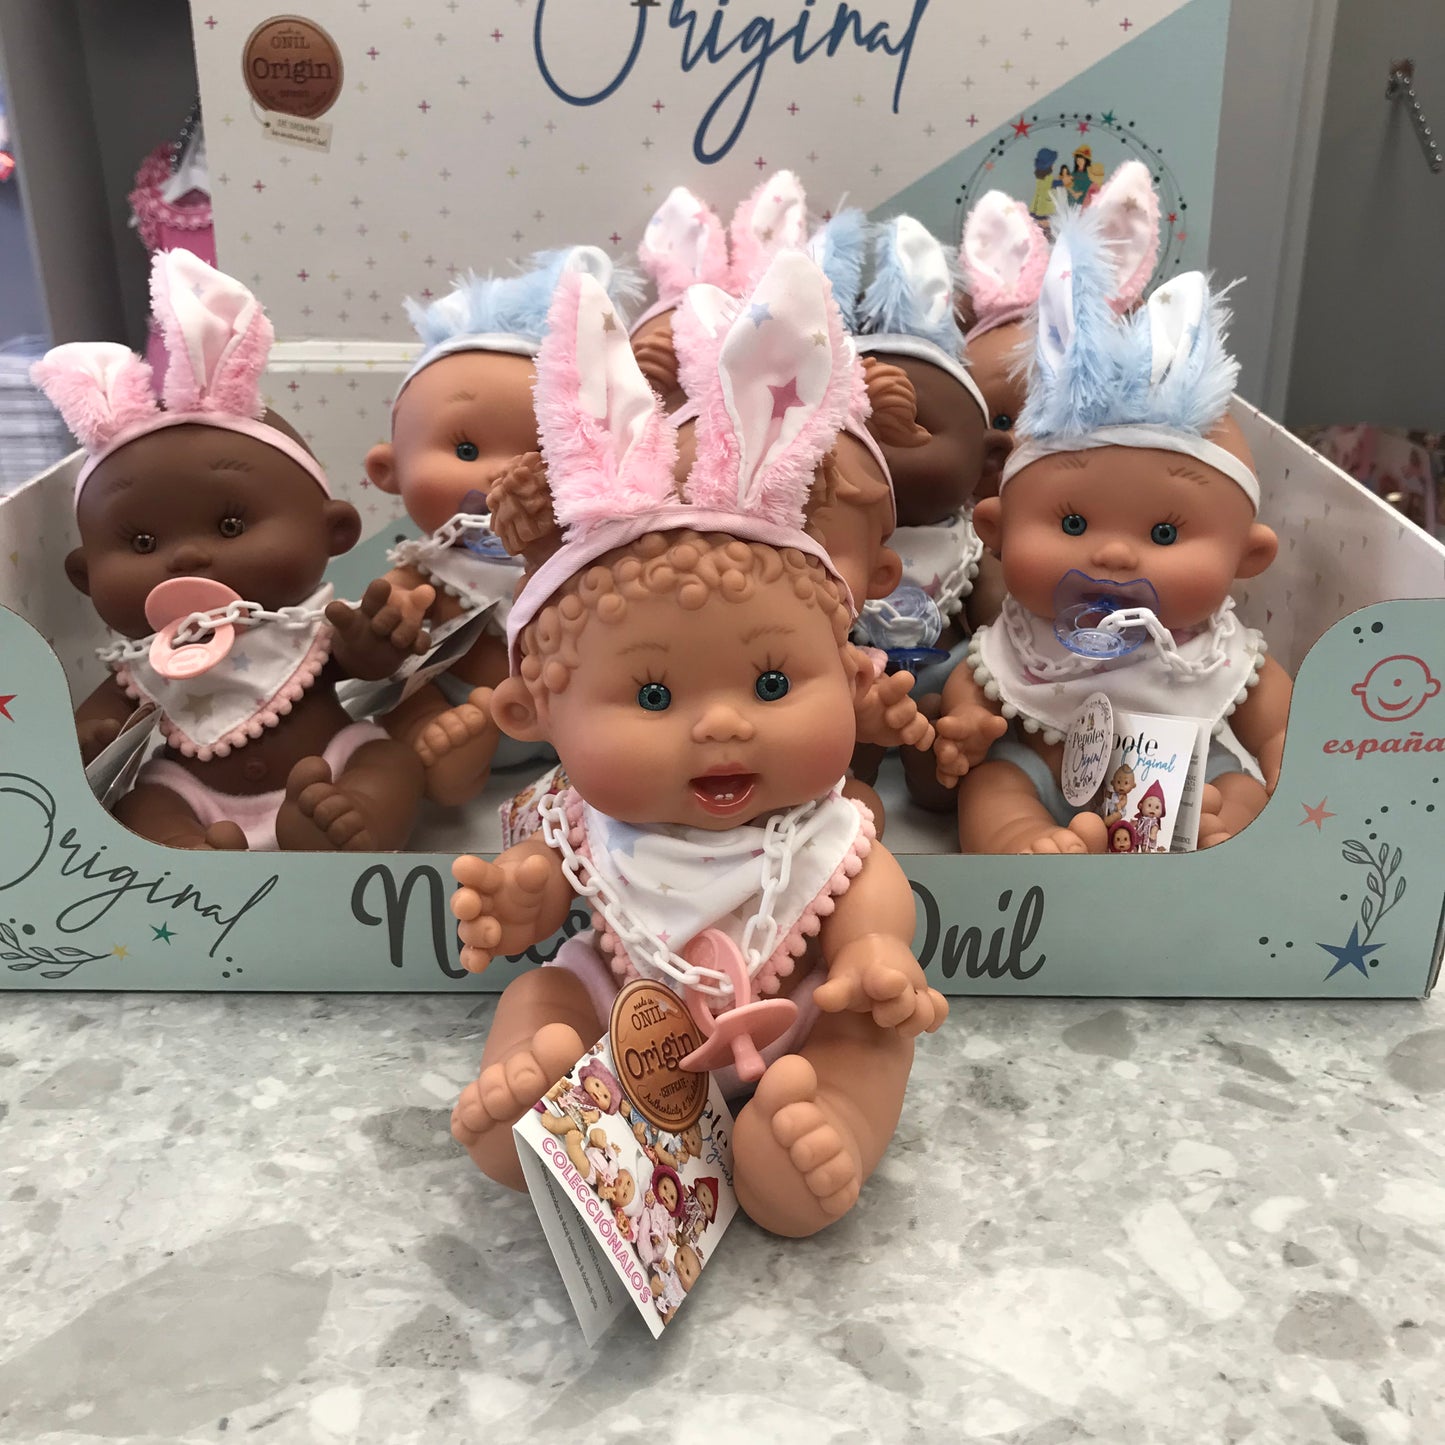 PEPOTES Easter Collection Spanish Doll